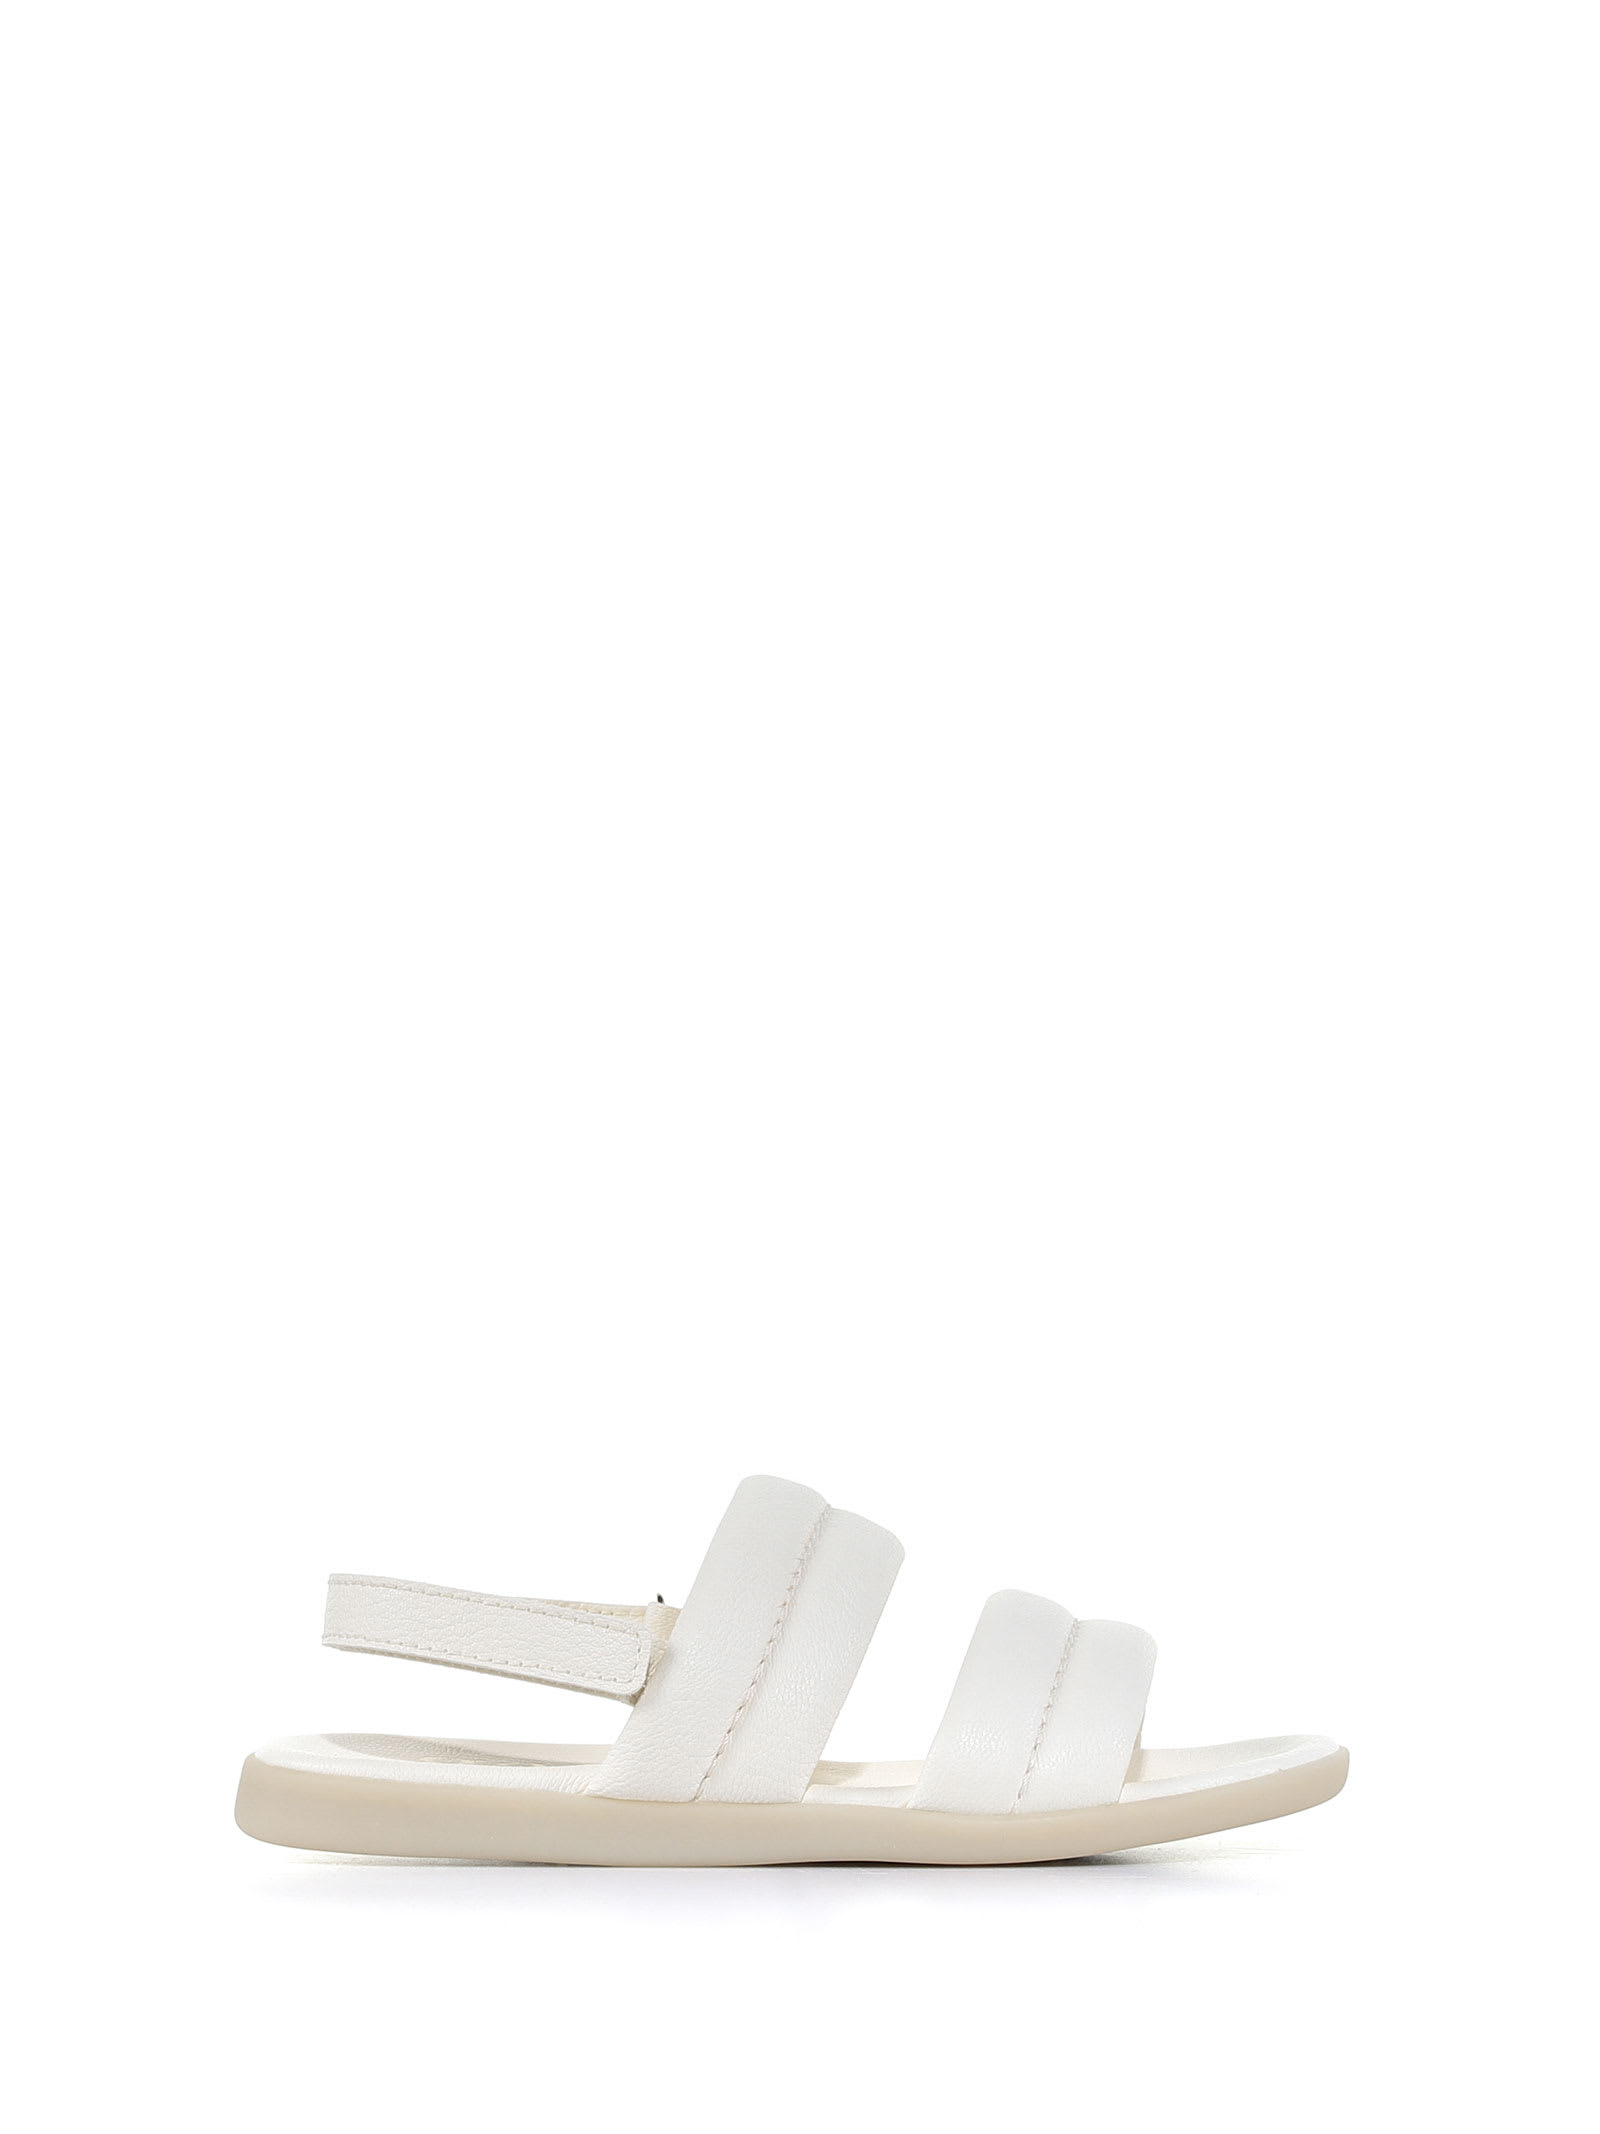 Pedro Garcia Leather Sandal With Bands Detail